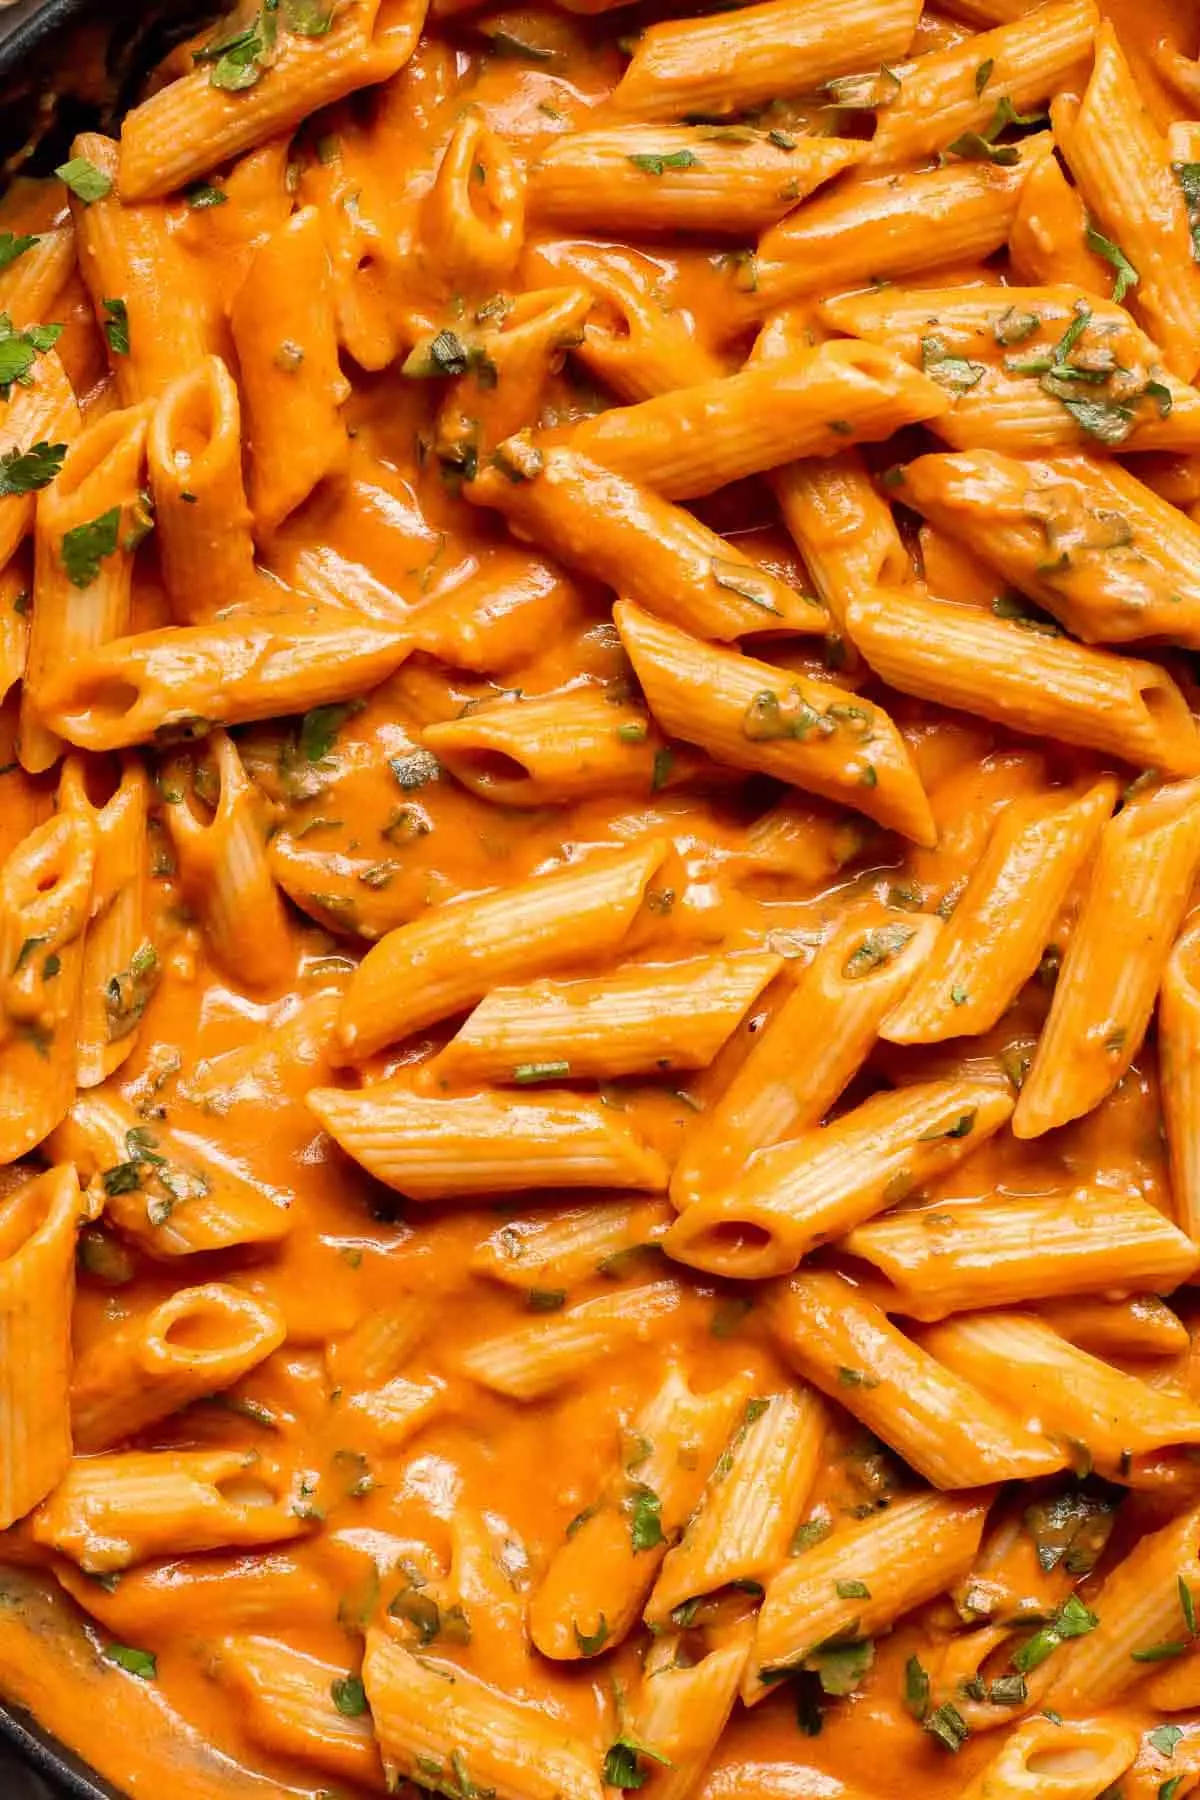 This Creamy Tomato Pasta is a simple and delicious meal made from scratch in 25 minutes with a cream and tomato based sauce that is rich and silky smooth.